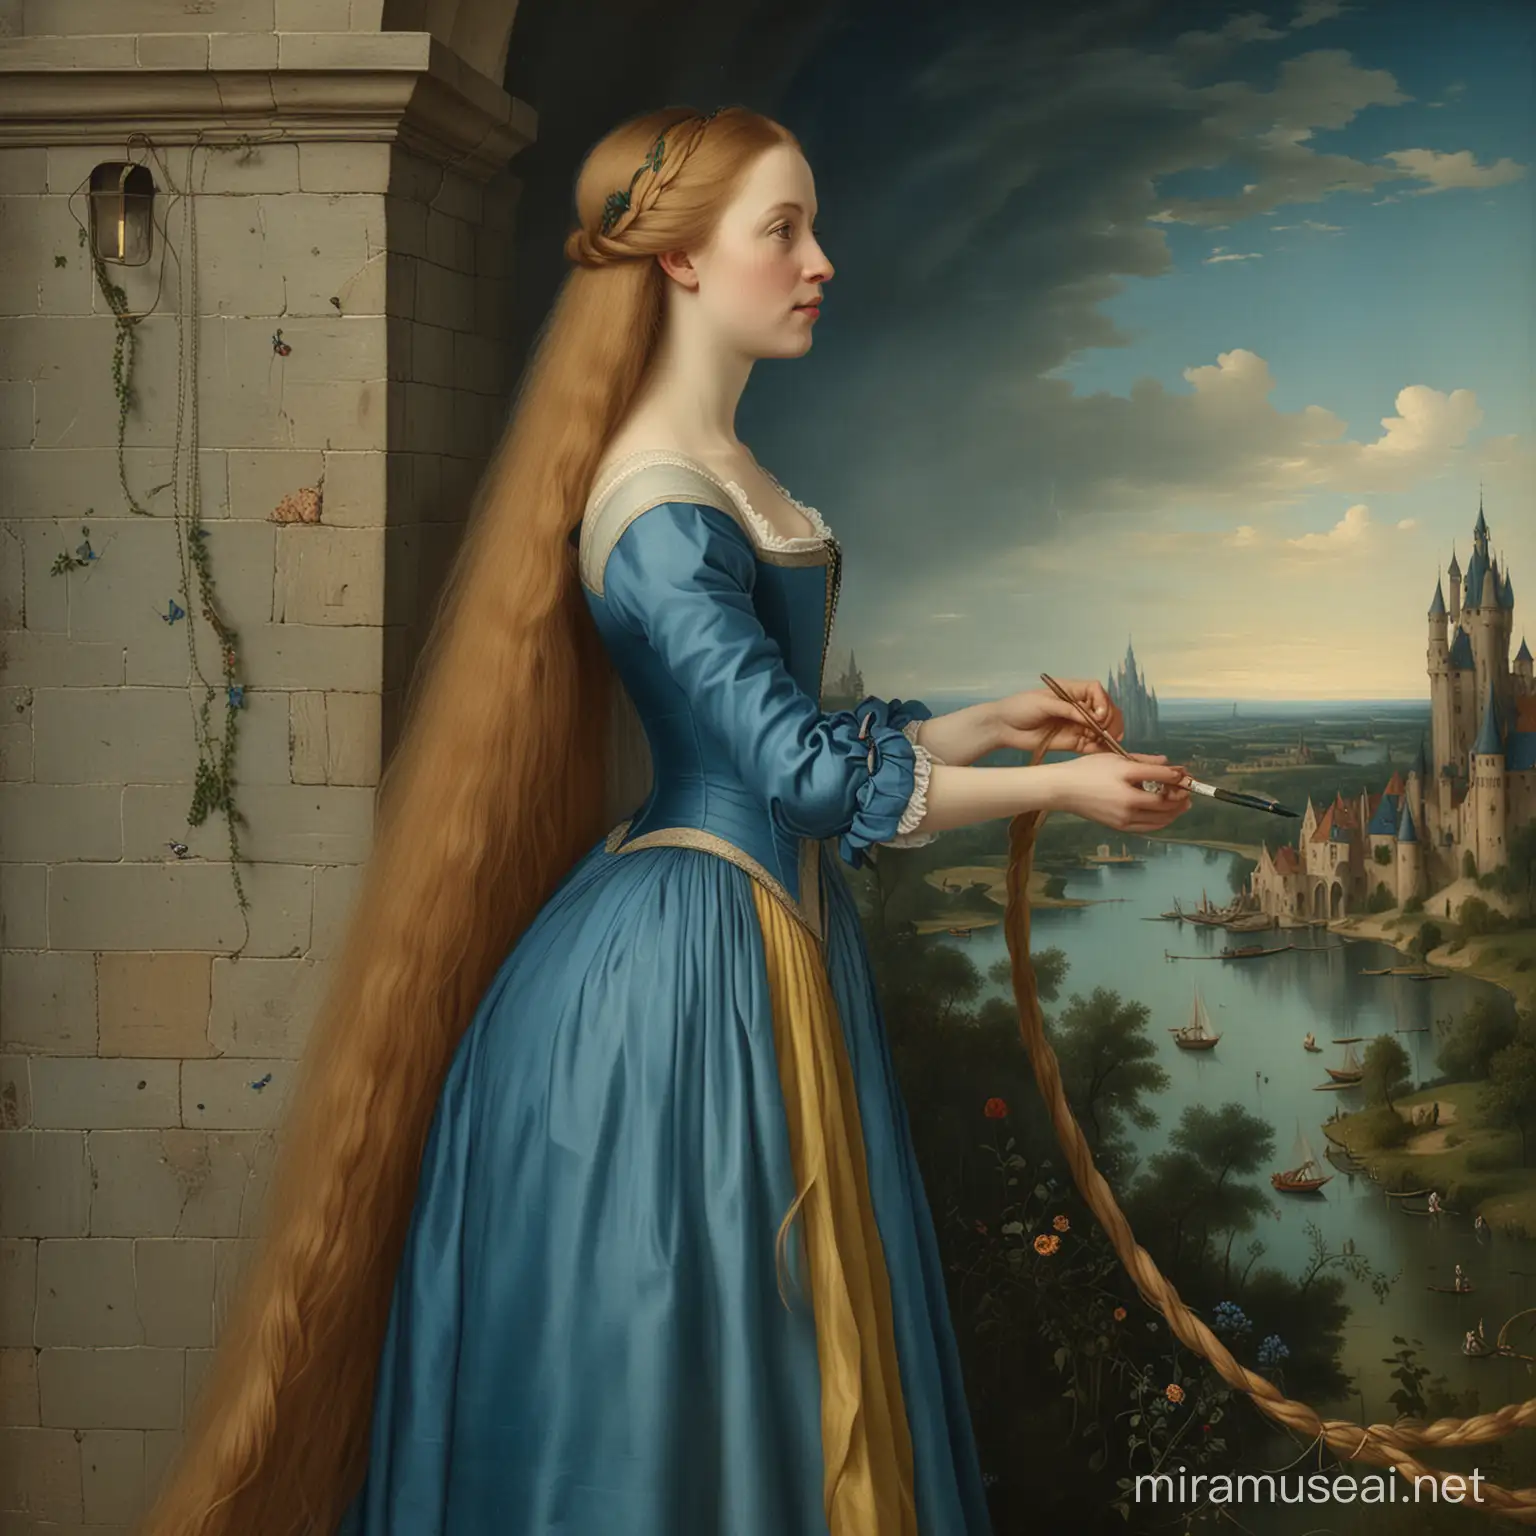 Rapunzel in Vibrant Blue Dress by Hieronymus Bosch